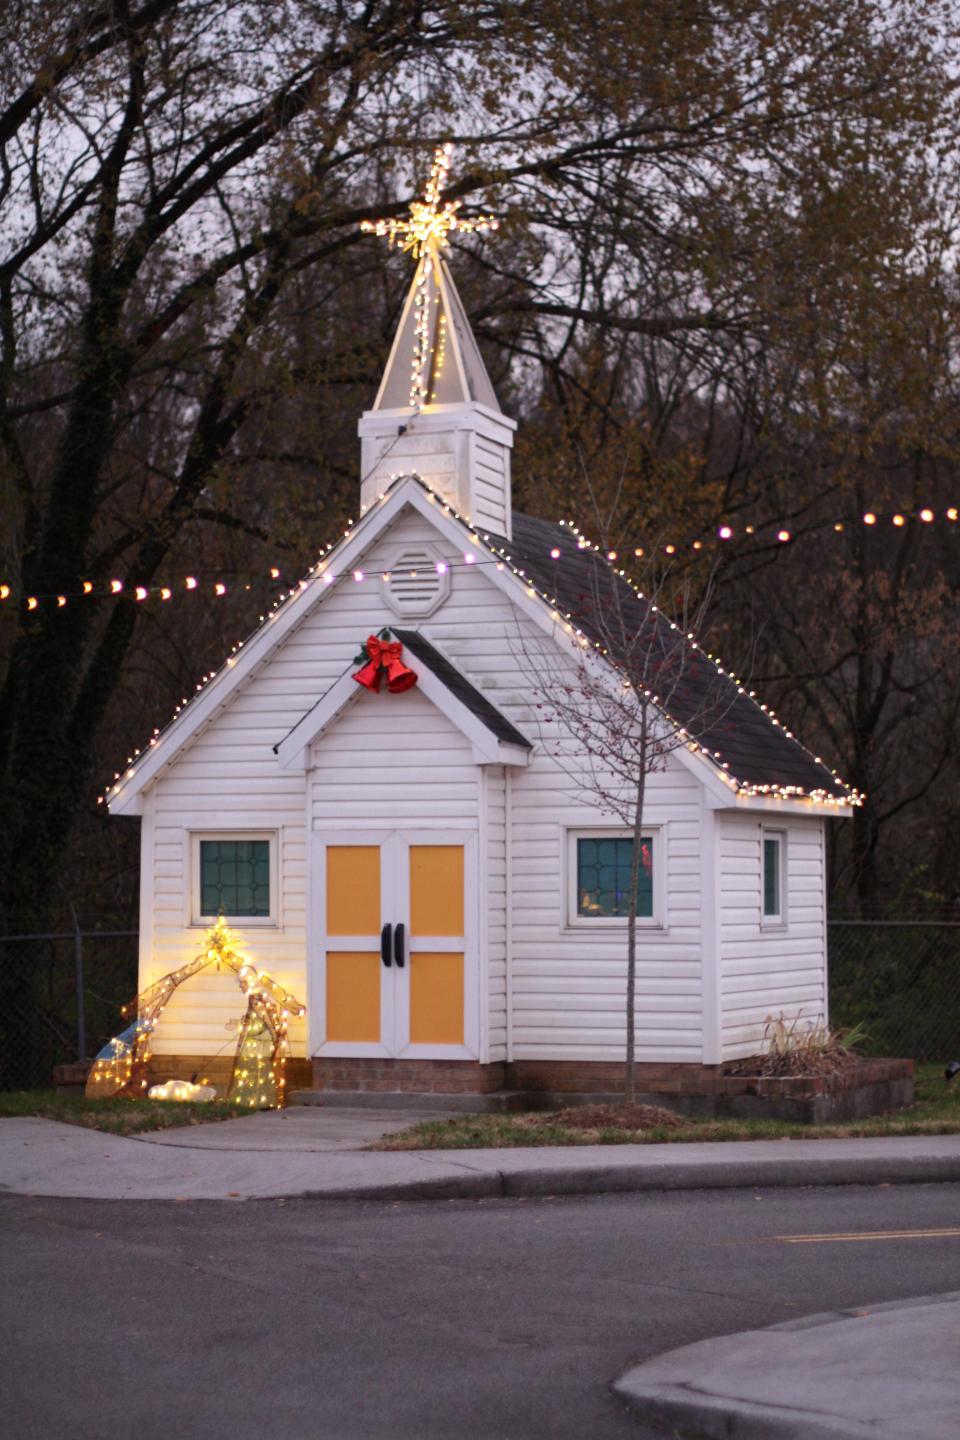 Church decorations at A Safety City Christmas on Dec. 1, 2021.